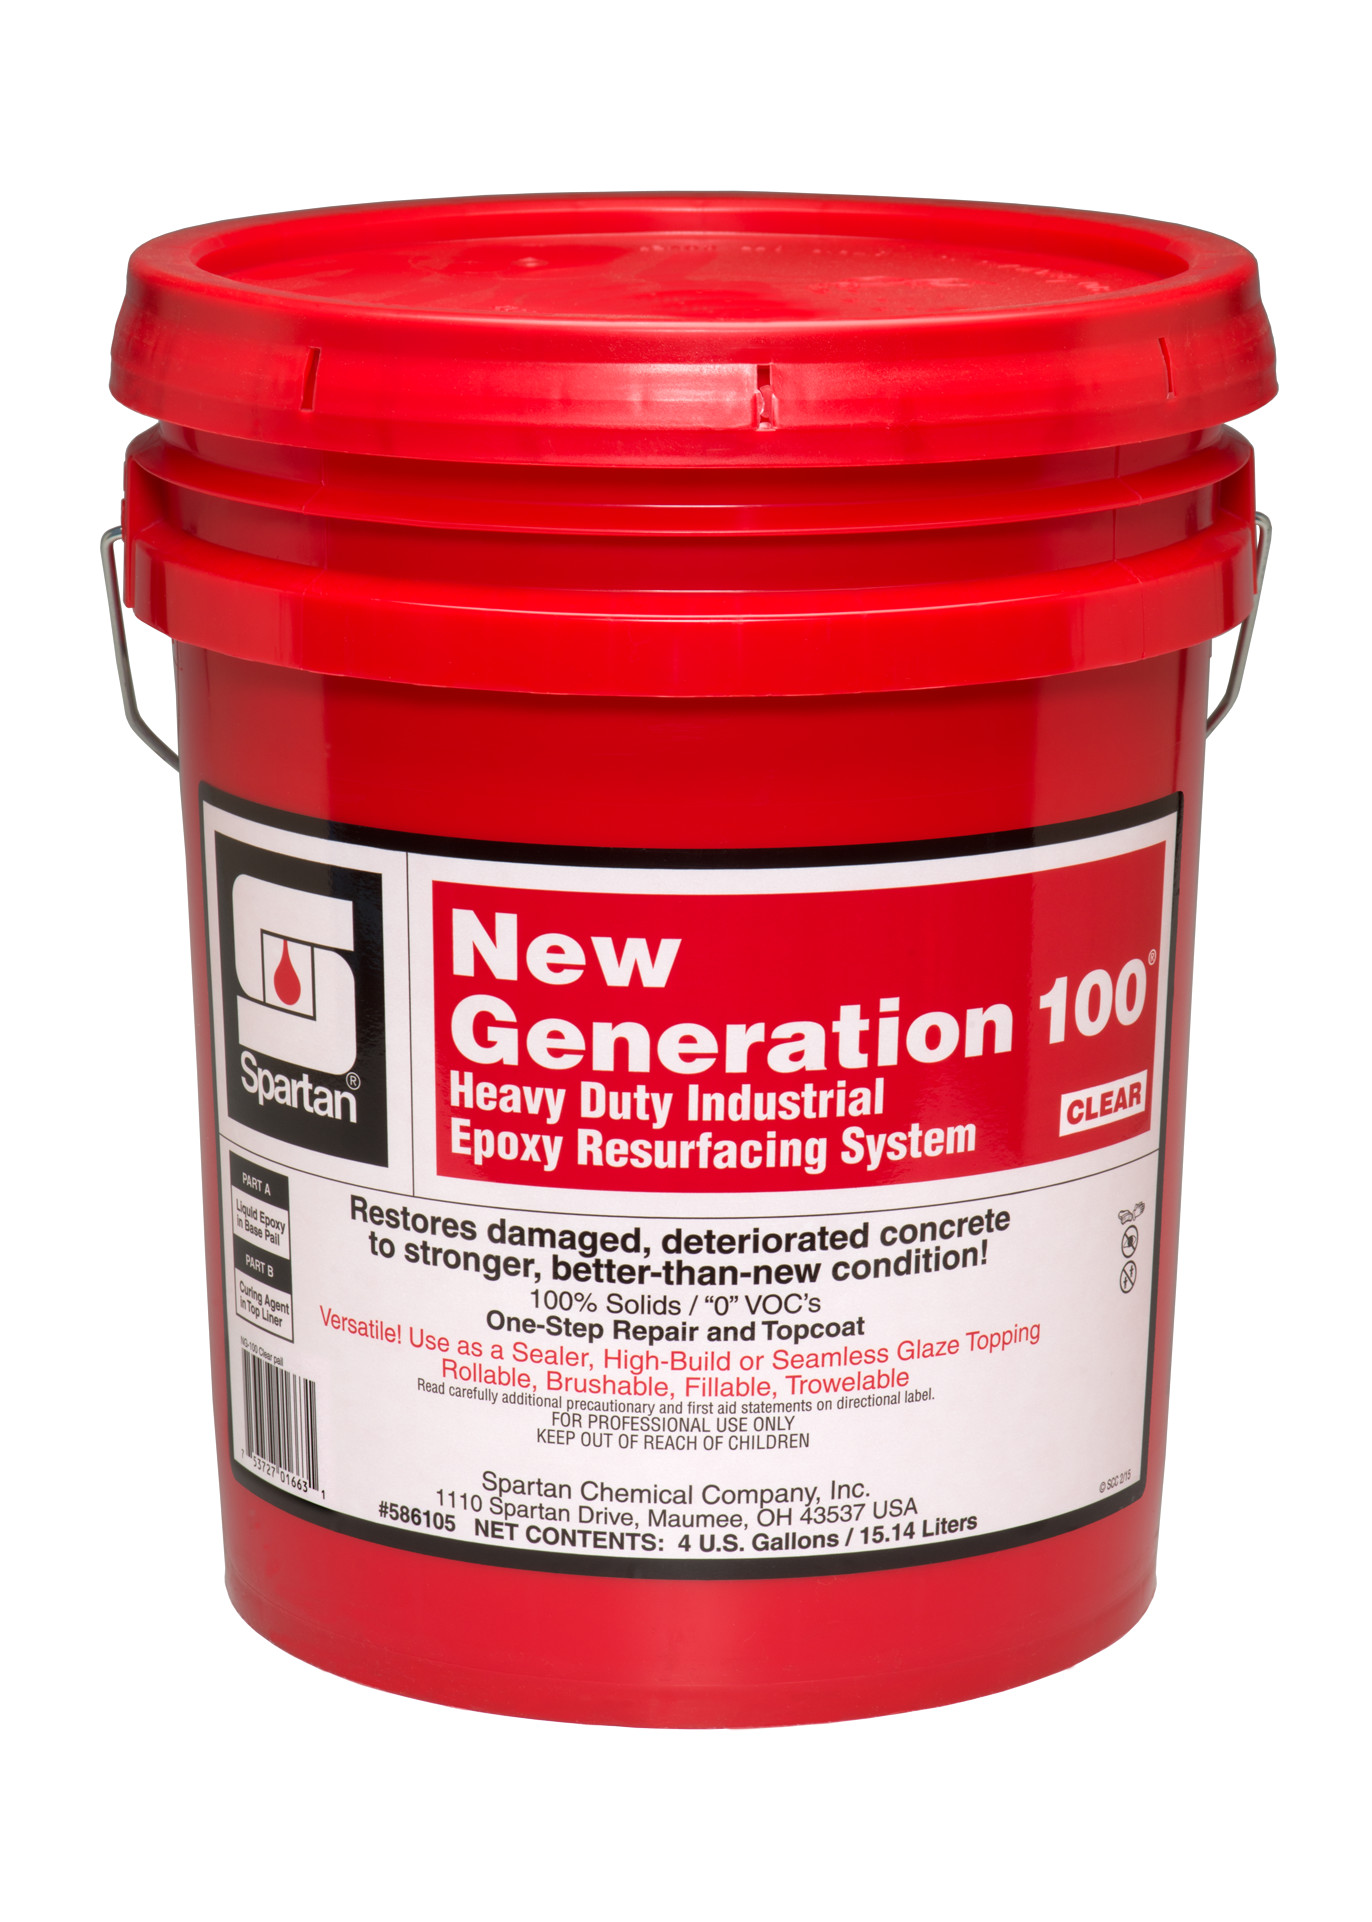 Spartan Chemical Company New Generation 100 Clear, 4GAL IN PAIL